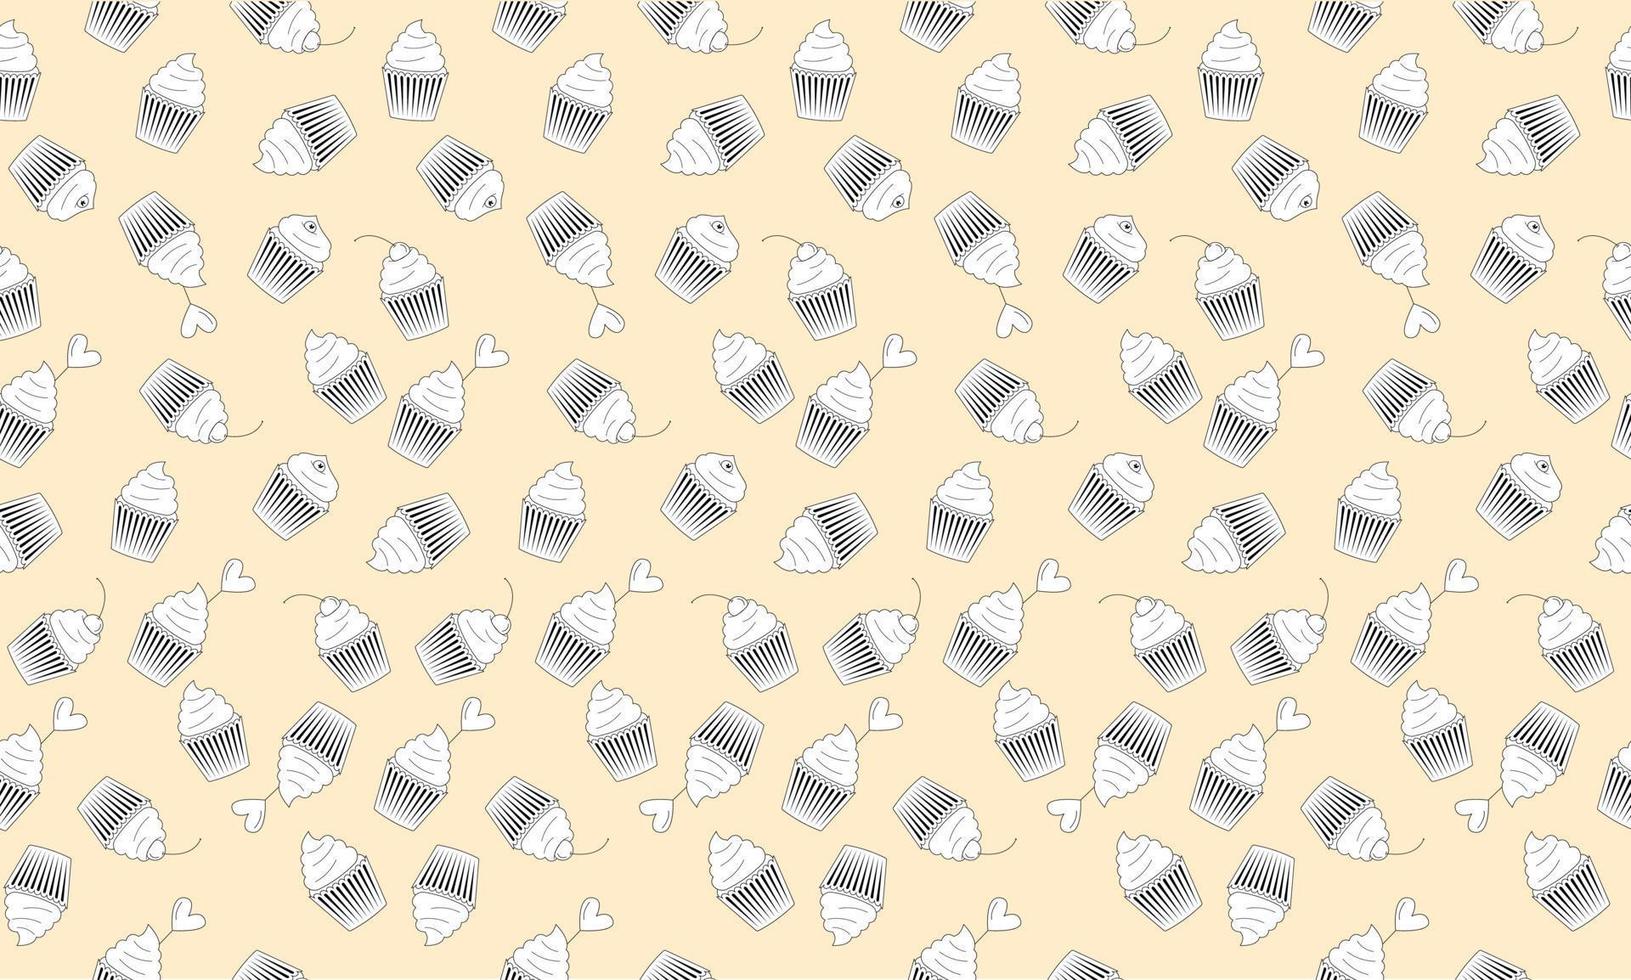 Seamless food cupcake pattern in black and white on a light yellow background vector